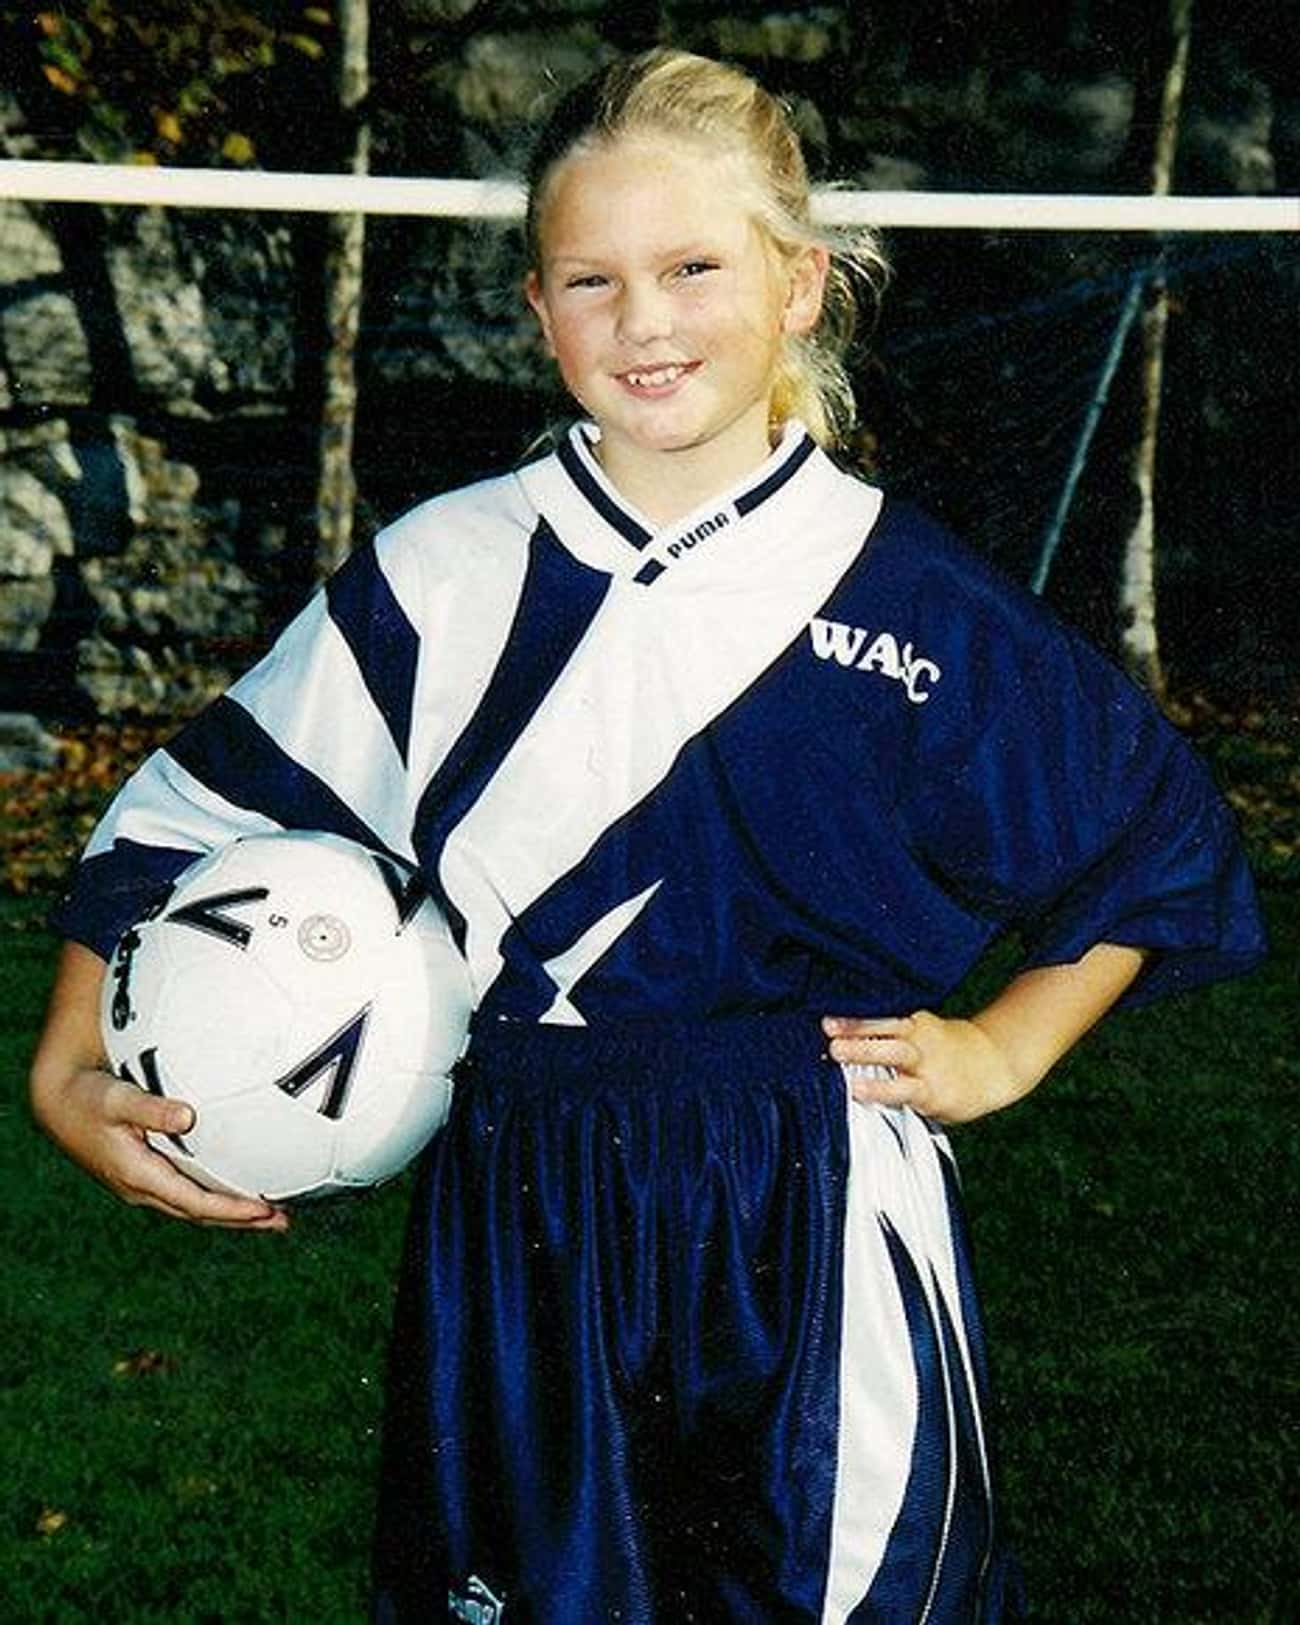 Young Taylor Swift in a Sports Uniform